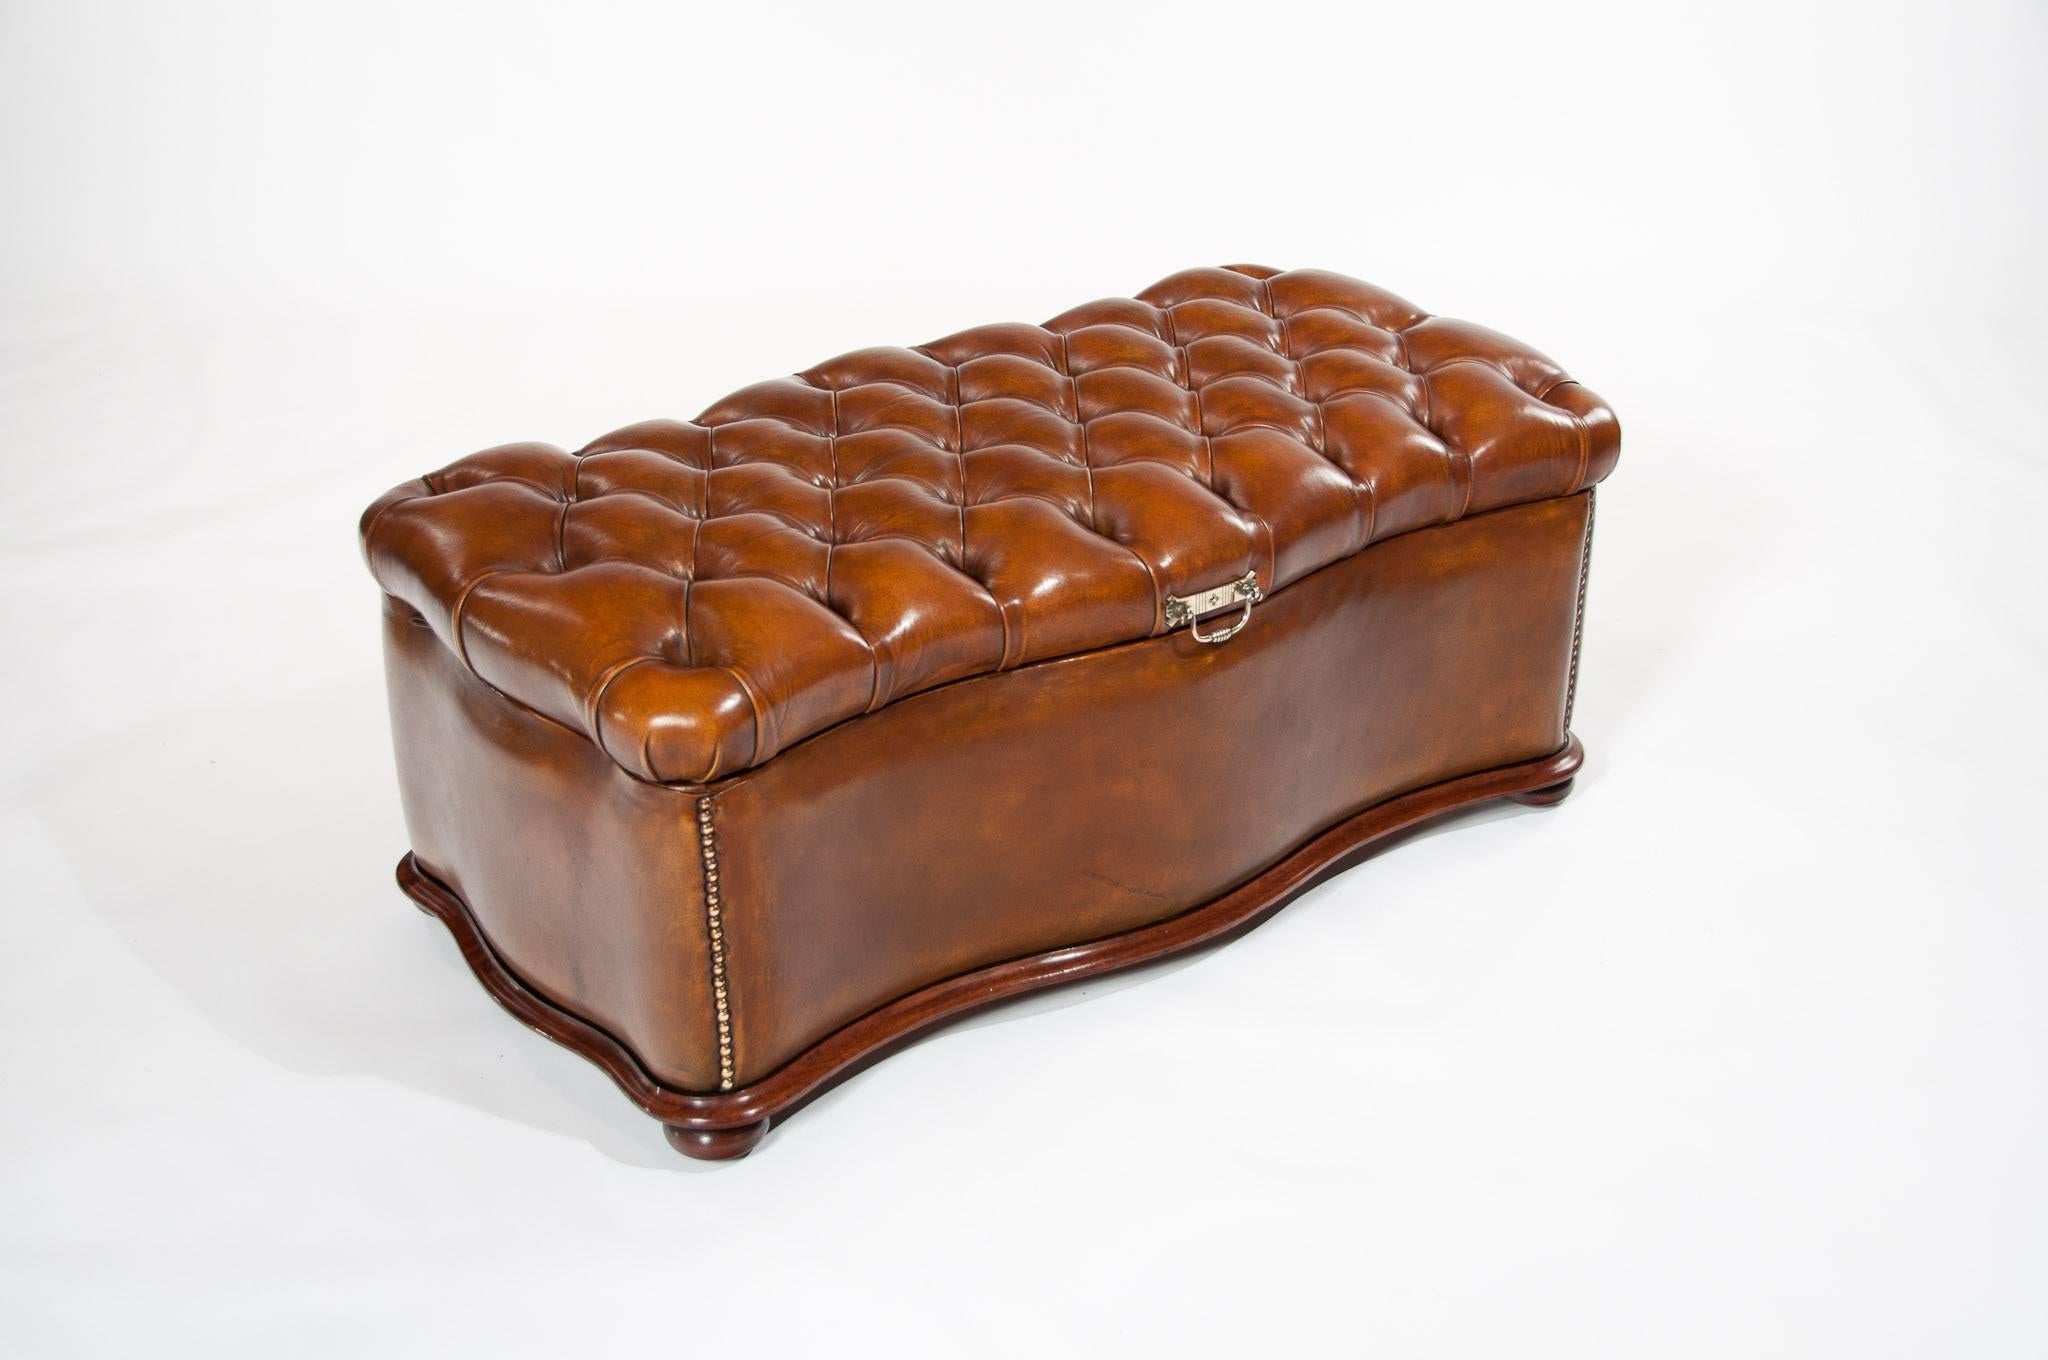 A very good quality mahogany mid-19th century, circa 1860 shaped leather upholstered deep buttoned ottoman.
The leather deep buttoned serpentine shaped top having a brass engraved plate handle which has the initials "J and D" stamped to